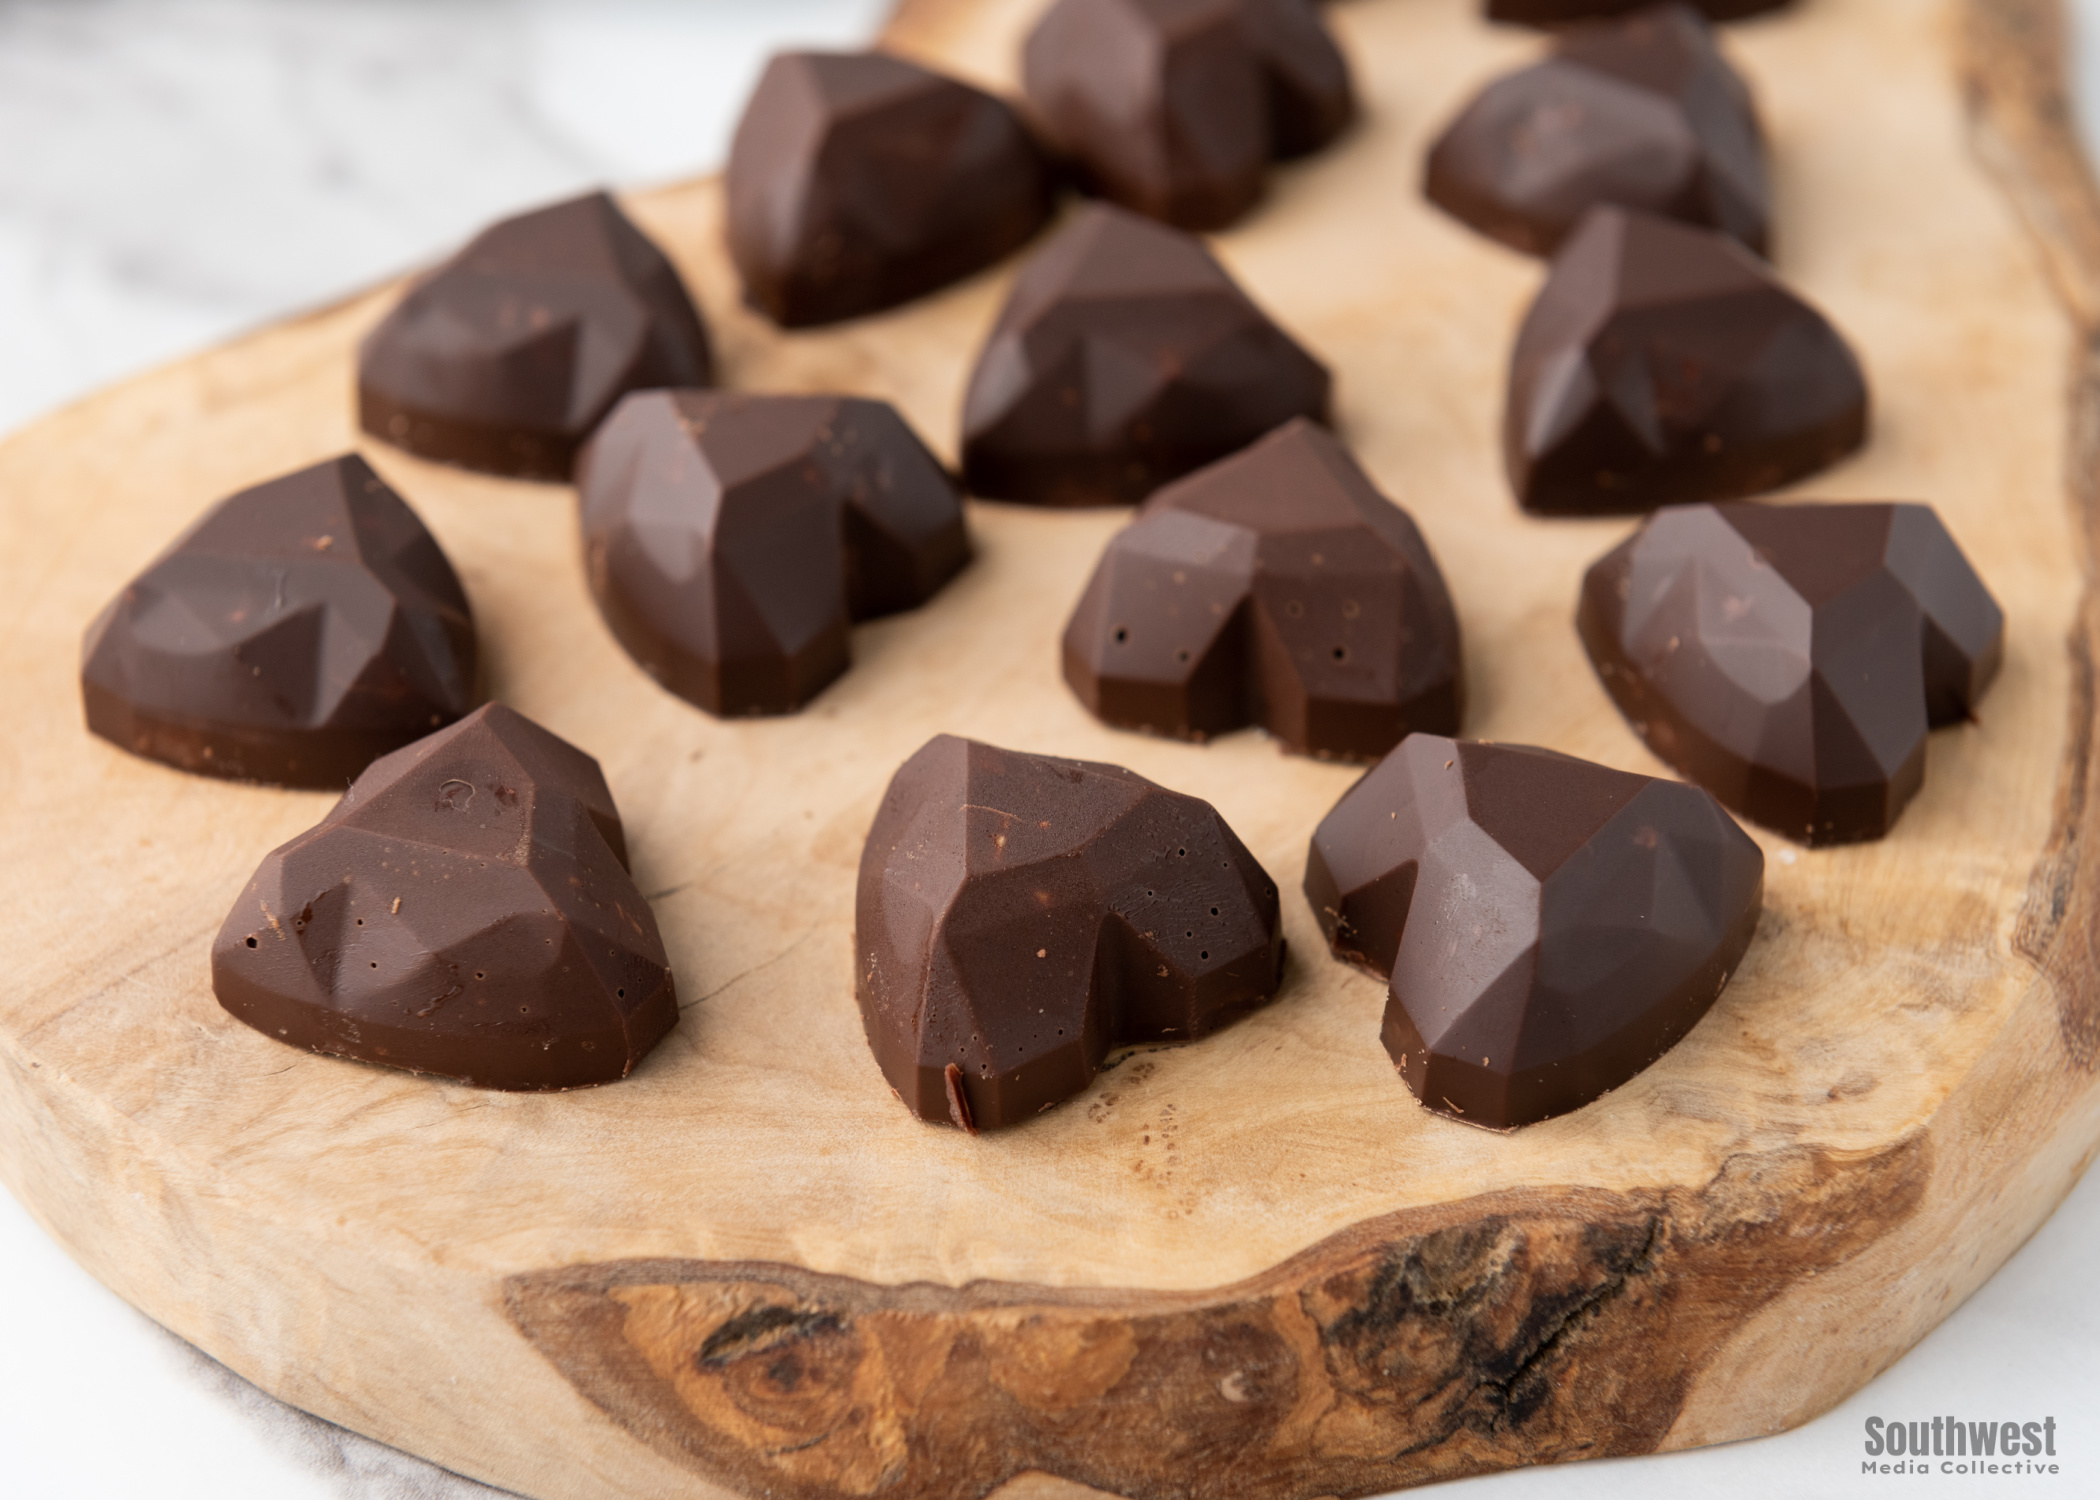 Nutella Bonbons bring together delicious chocolate, Nutella and hazelnuts to create these incredible little gems that you won't be able to stop eating!